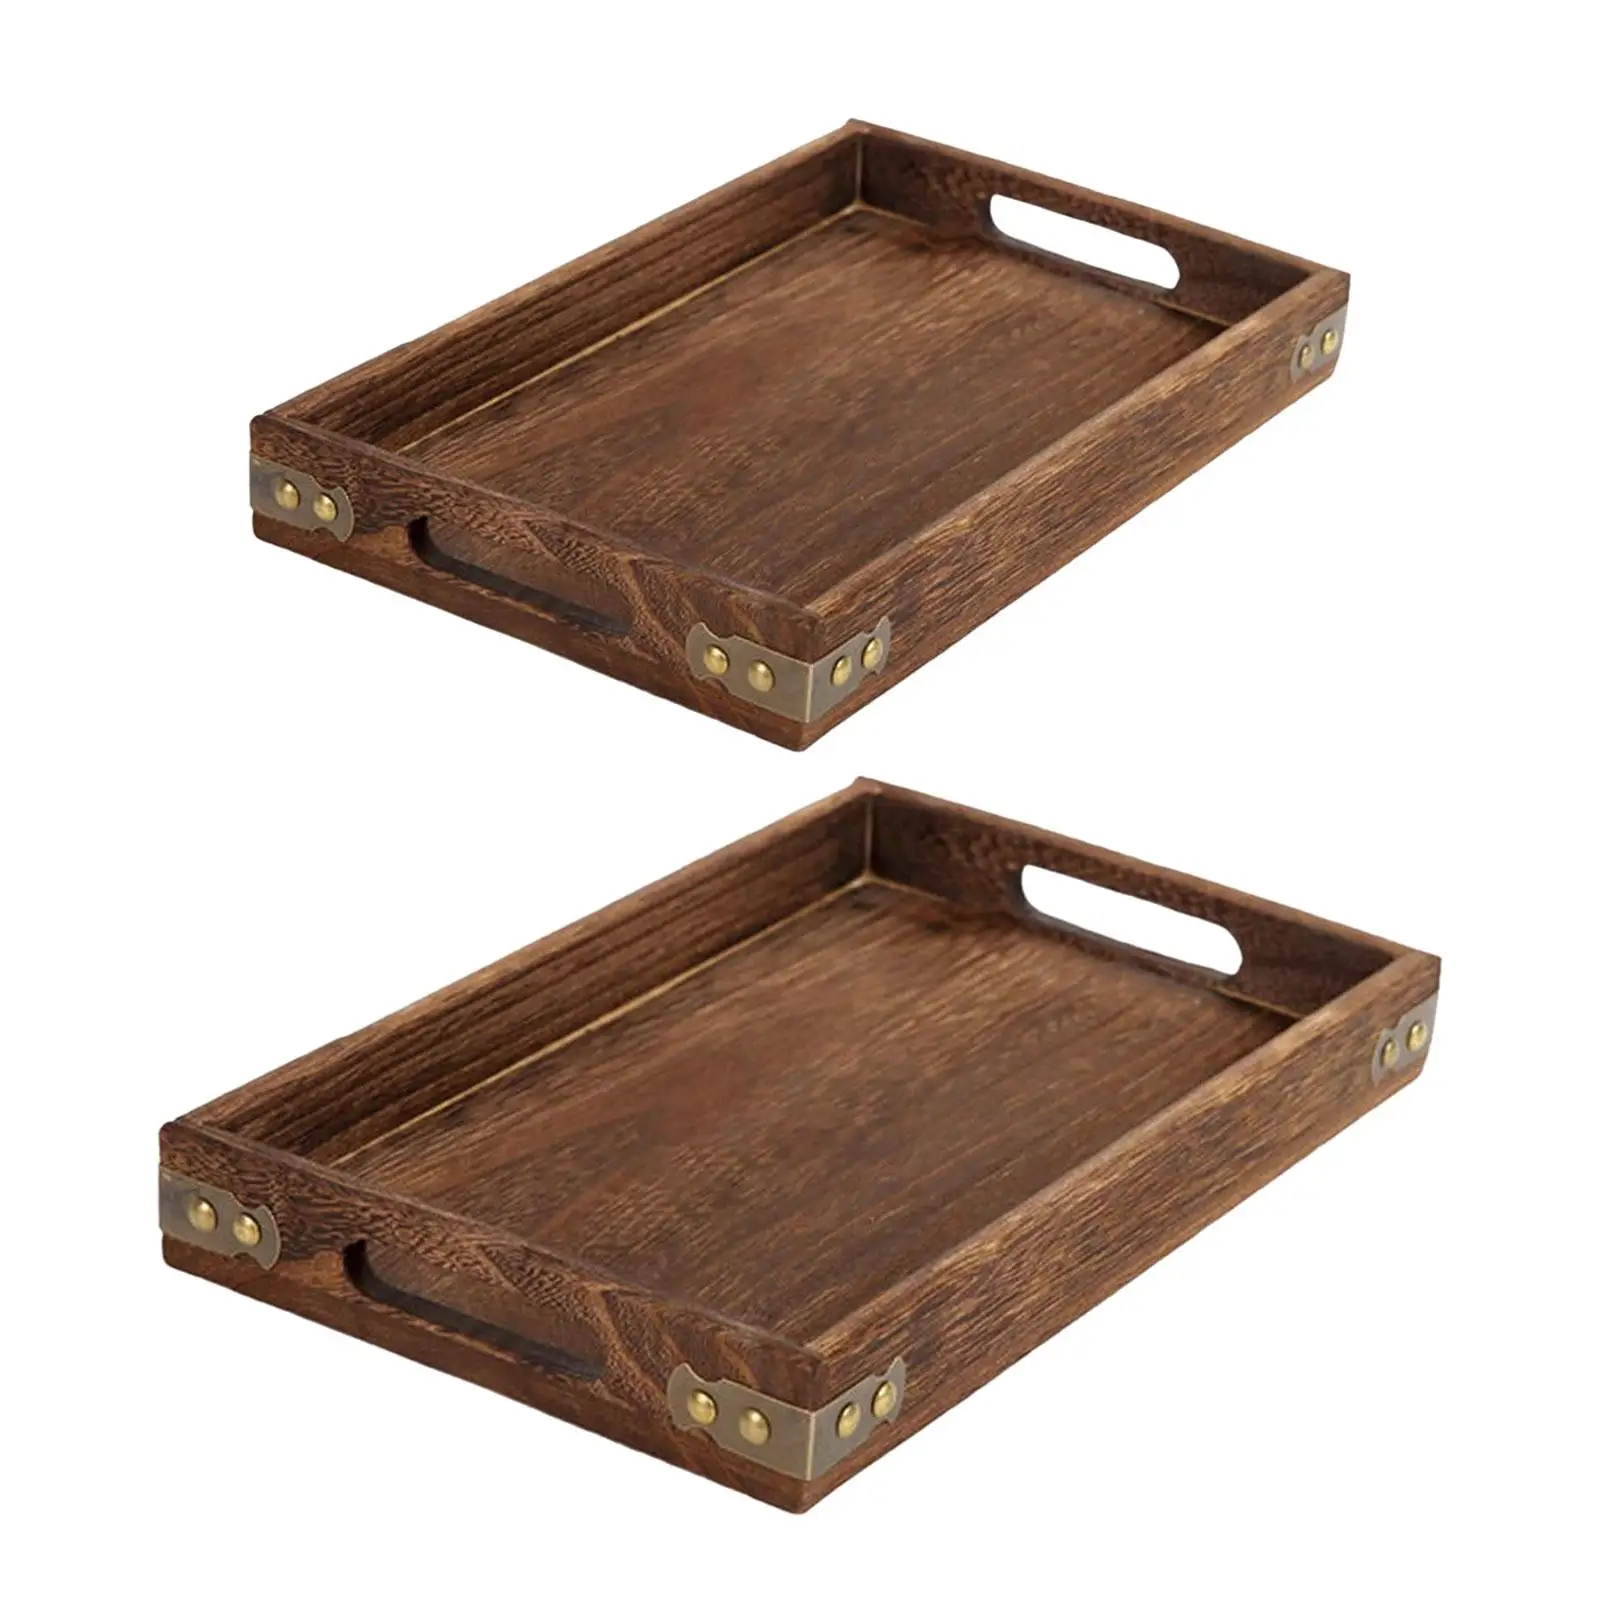 Wooden Serving Tray with Handle Eating Tray Housewarming Party Gift Durable